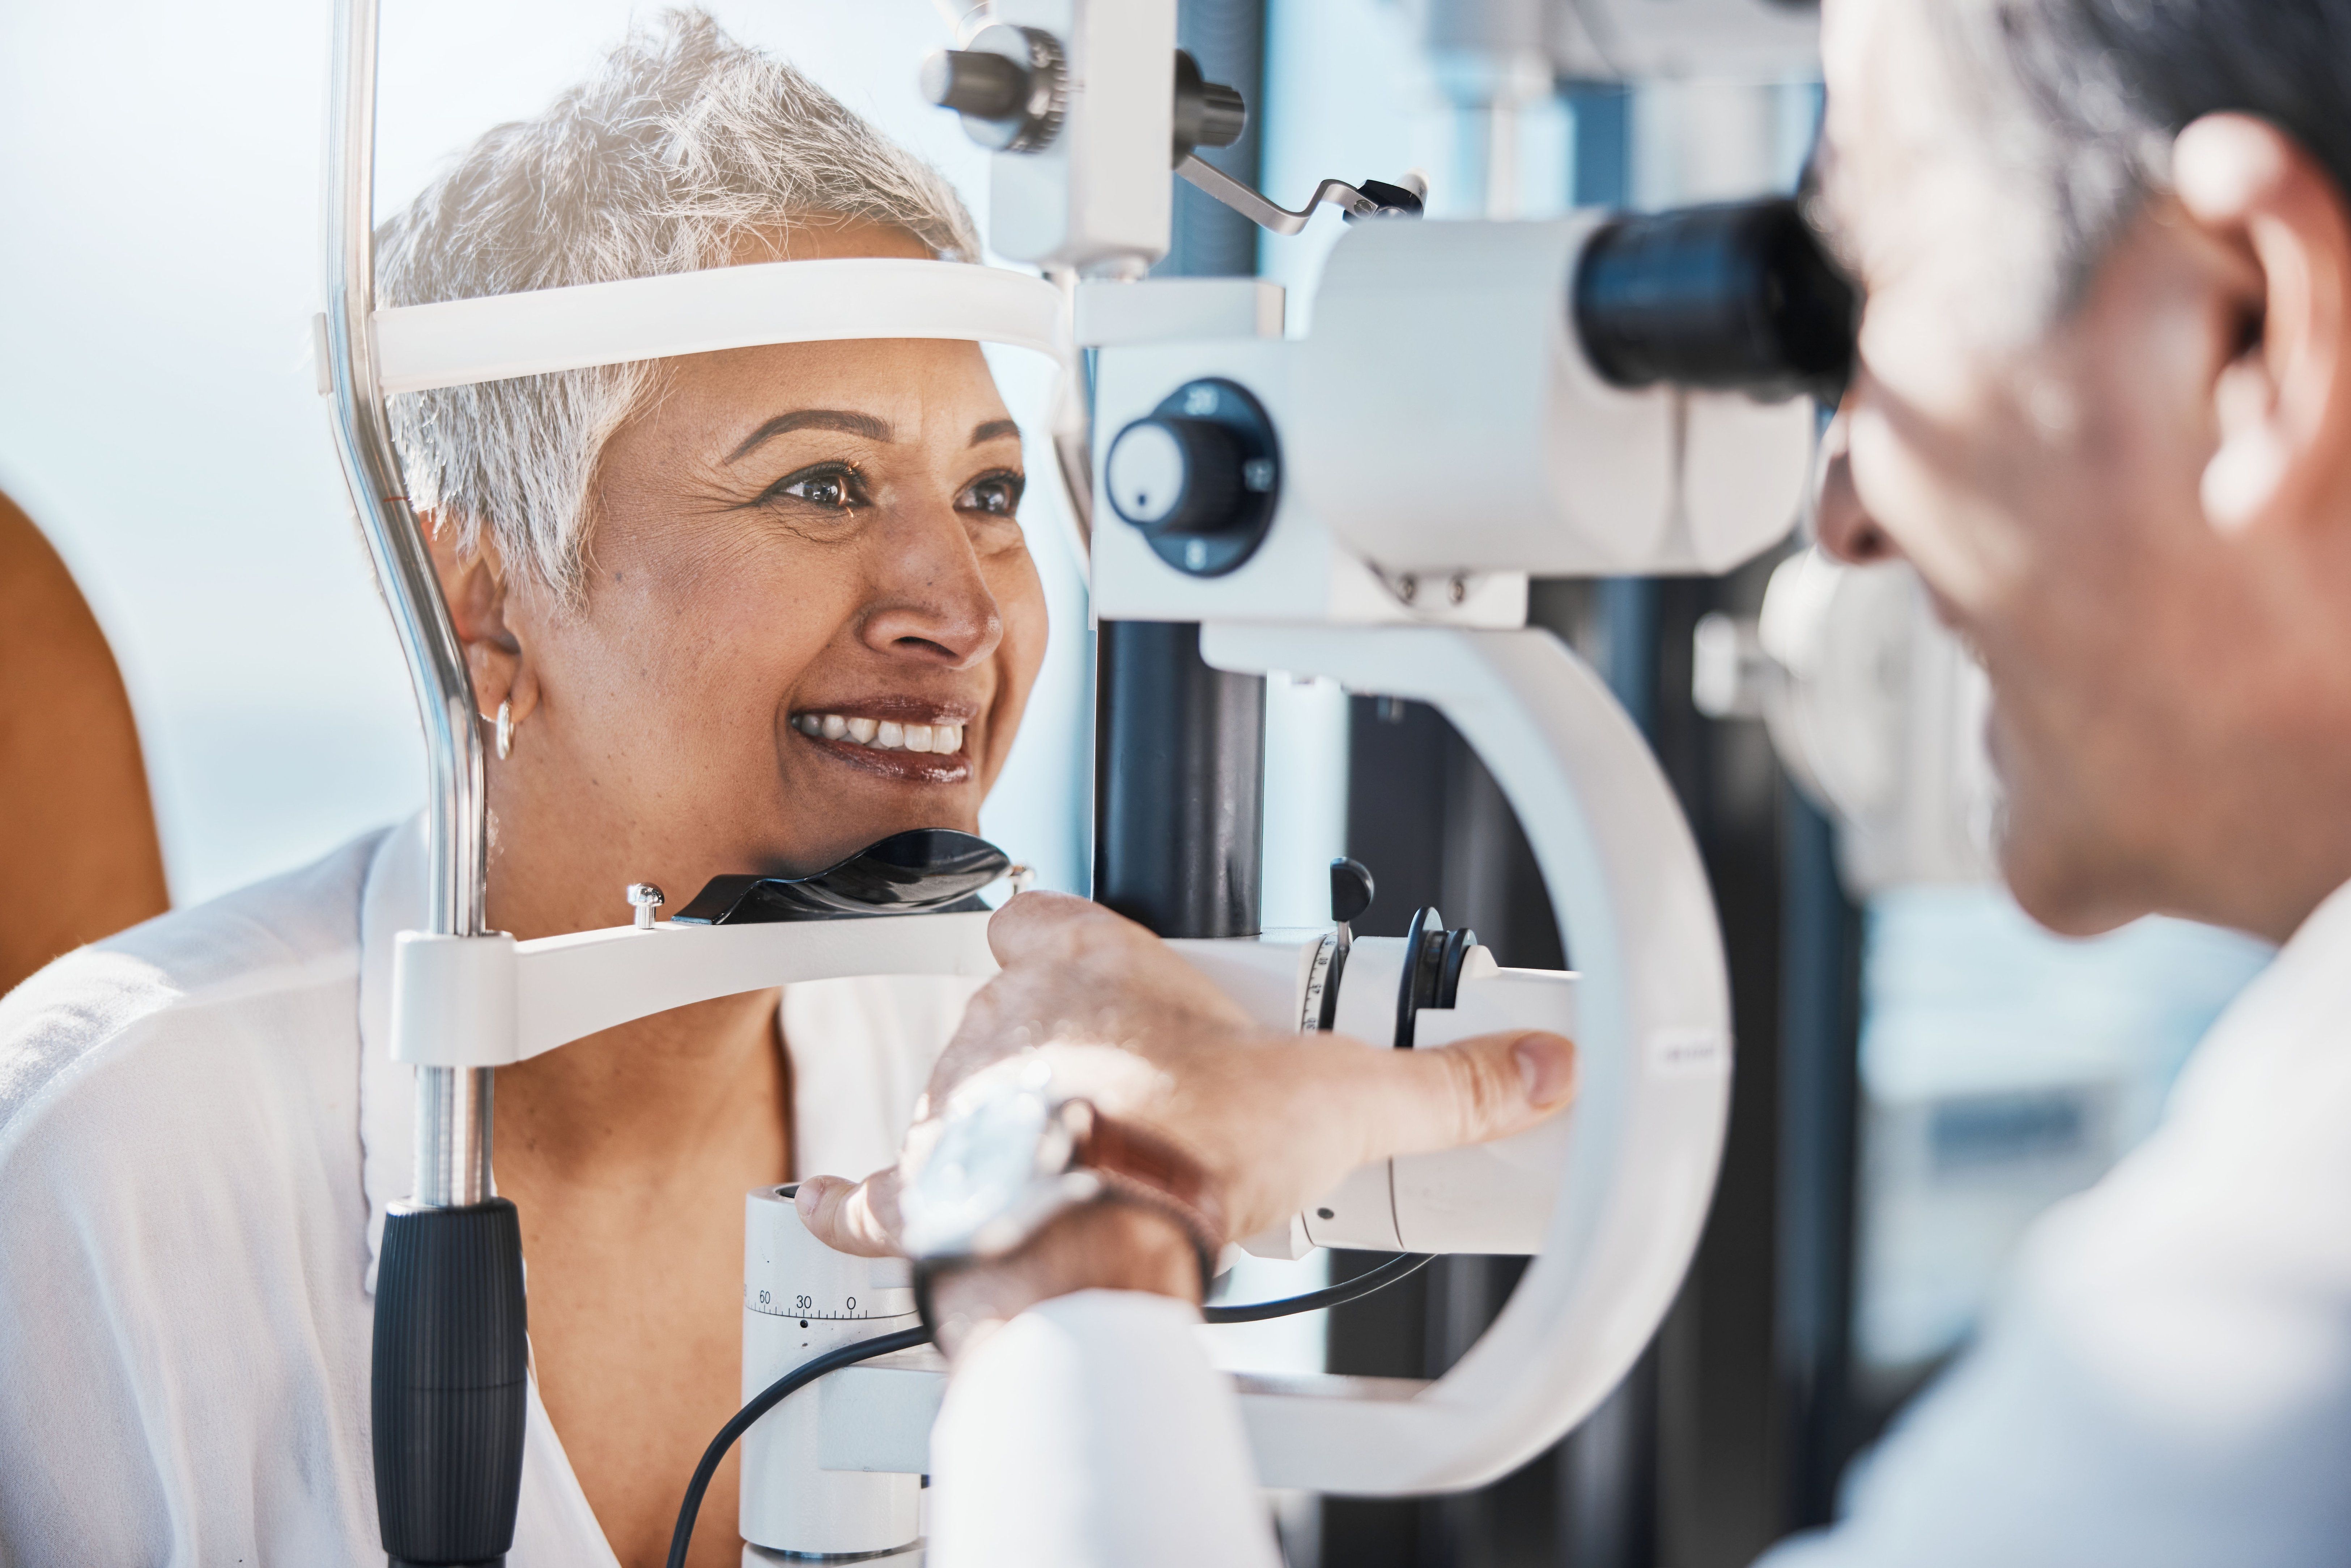 7 Important Signs That You Need an Eye Exam